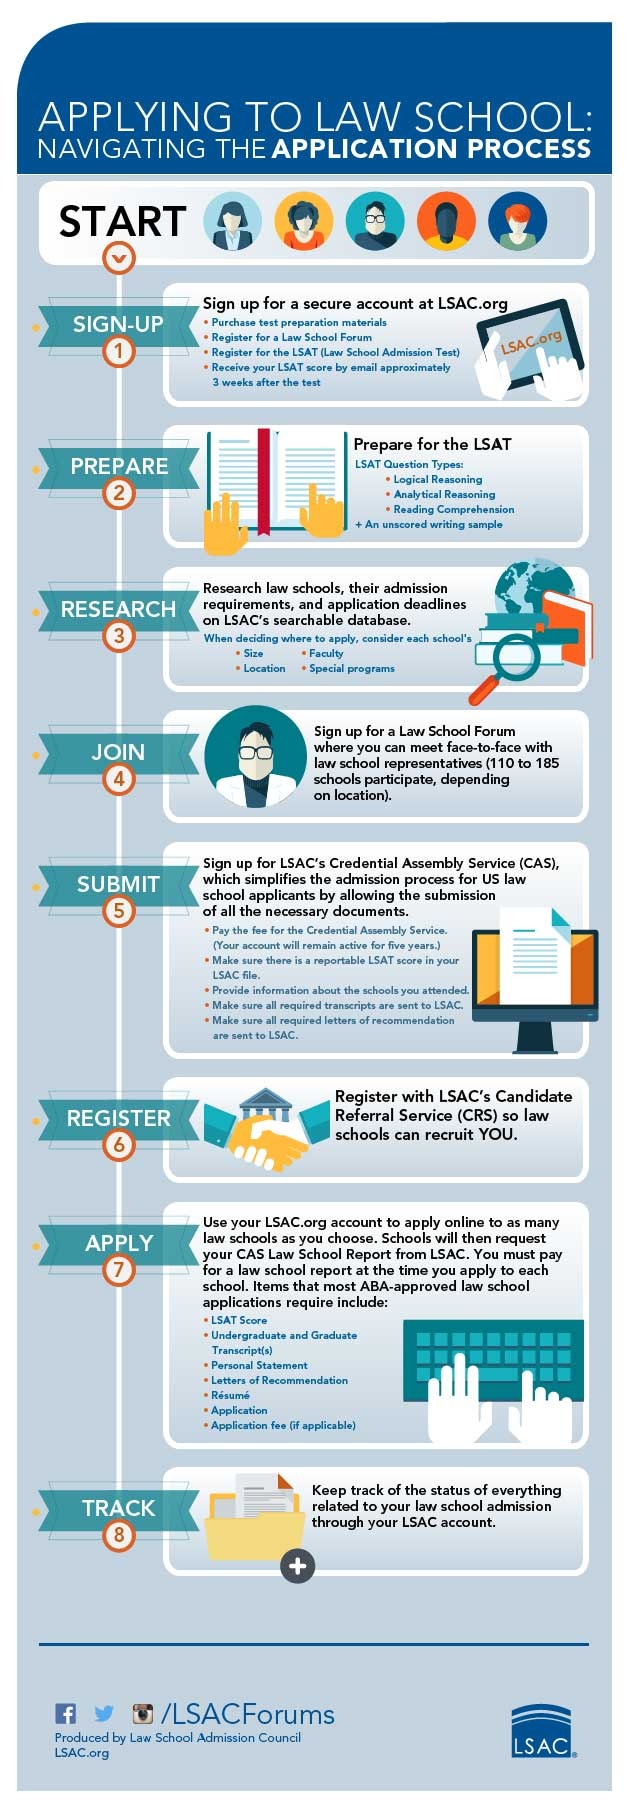 The Application Process (from LSAC)